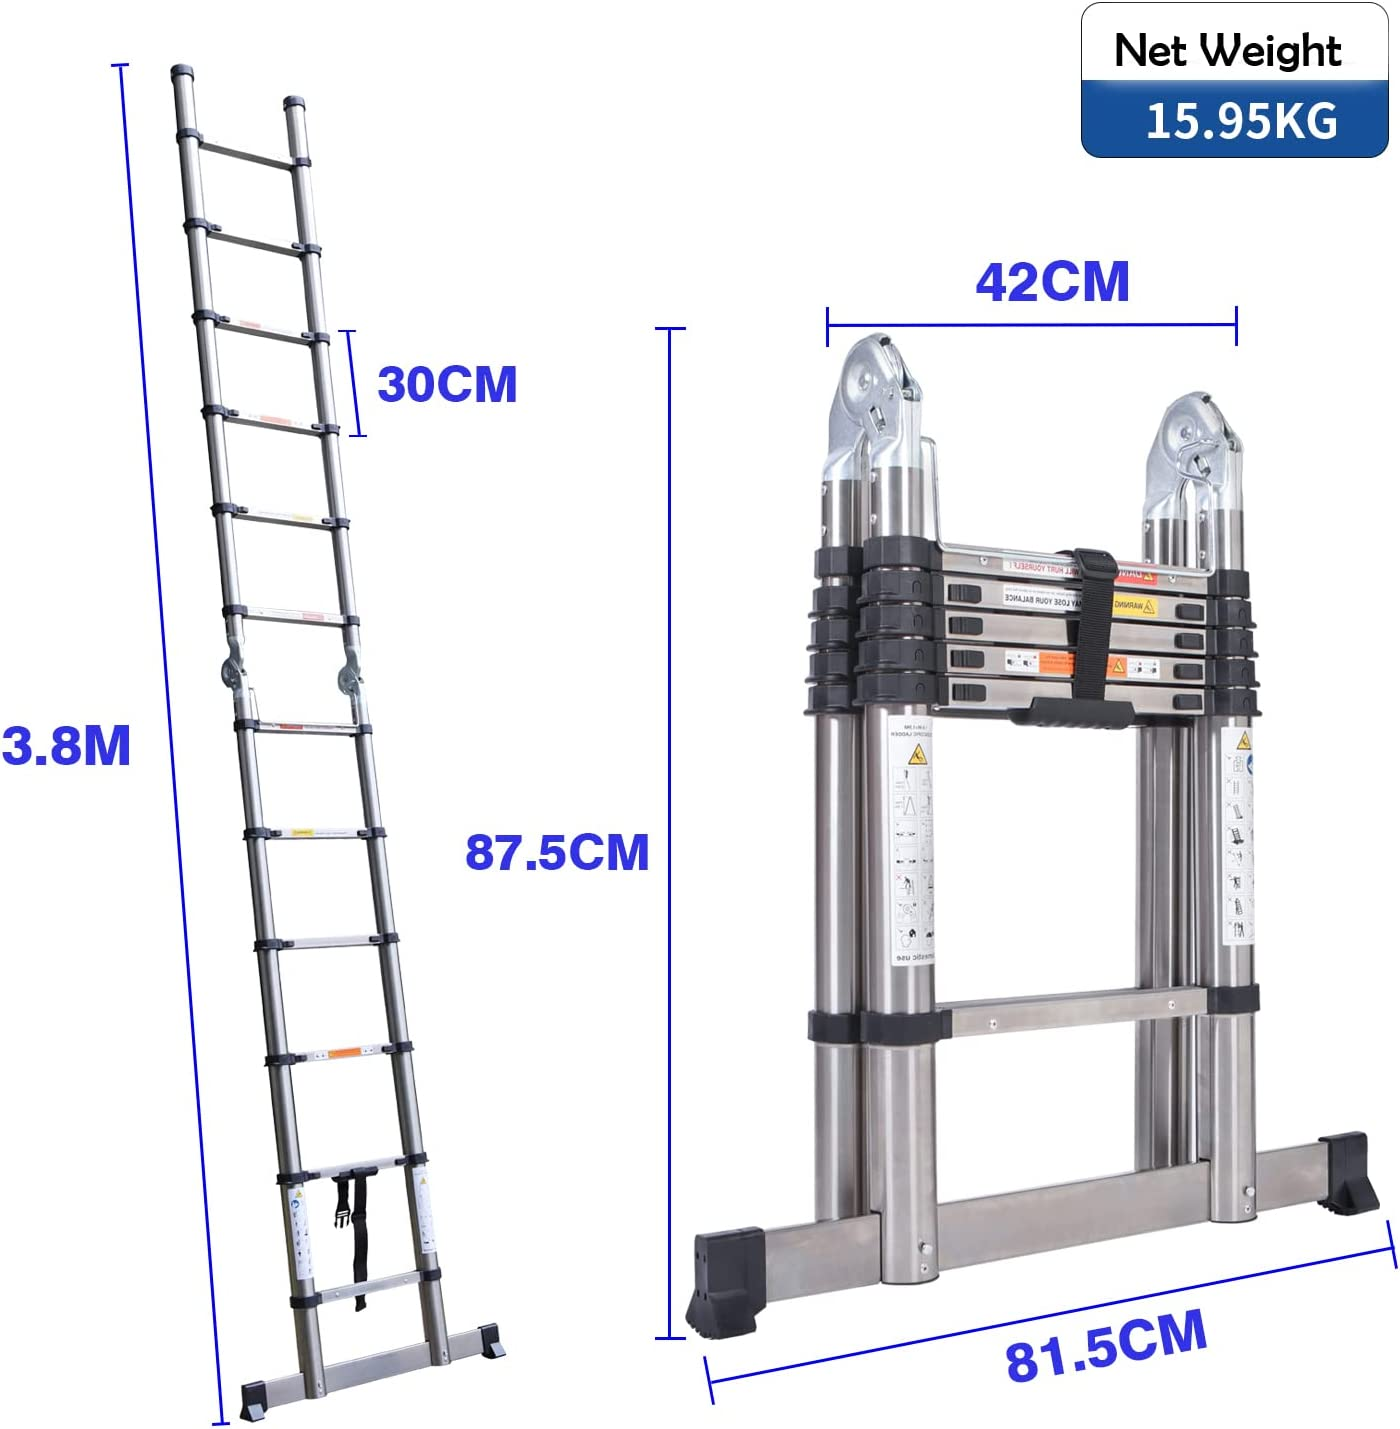 3.8M Telescopic Ladder Stainless Steel Heavy Duty Max Capacity up to 330lbs150kgs with Stabilizer Bar Extension A Frame Ladder 1.9+1.9M